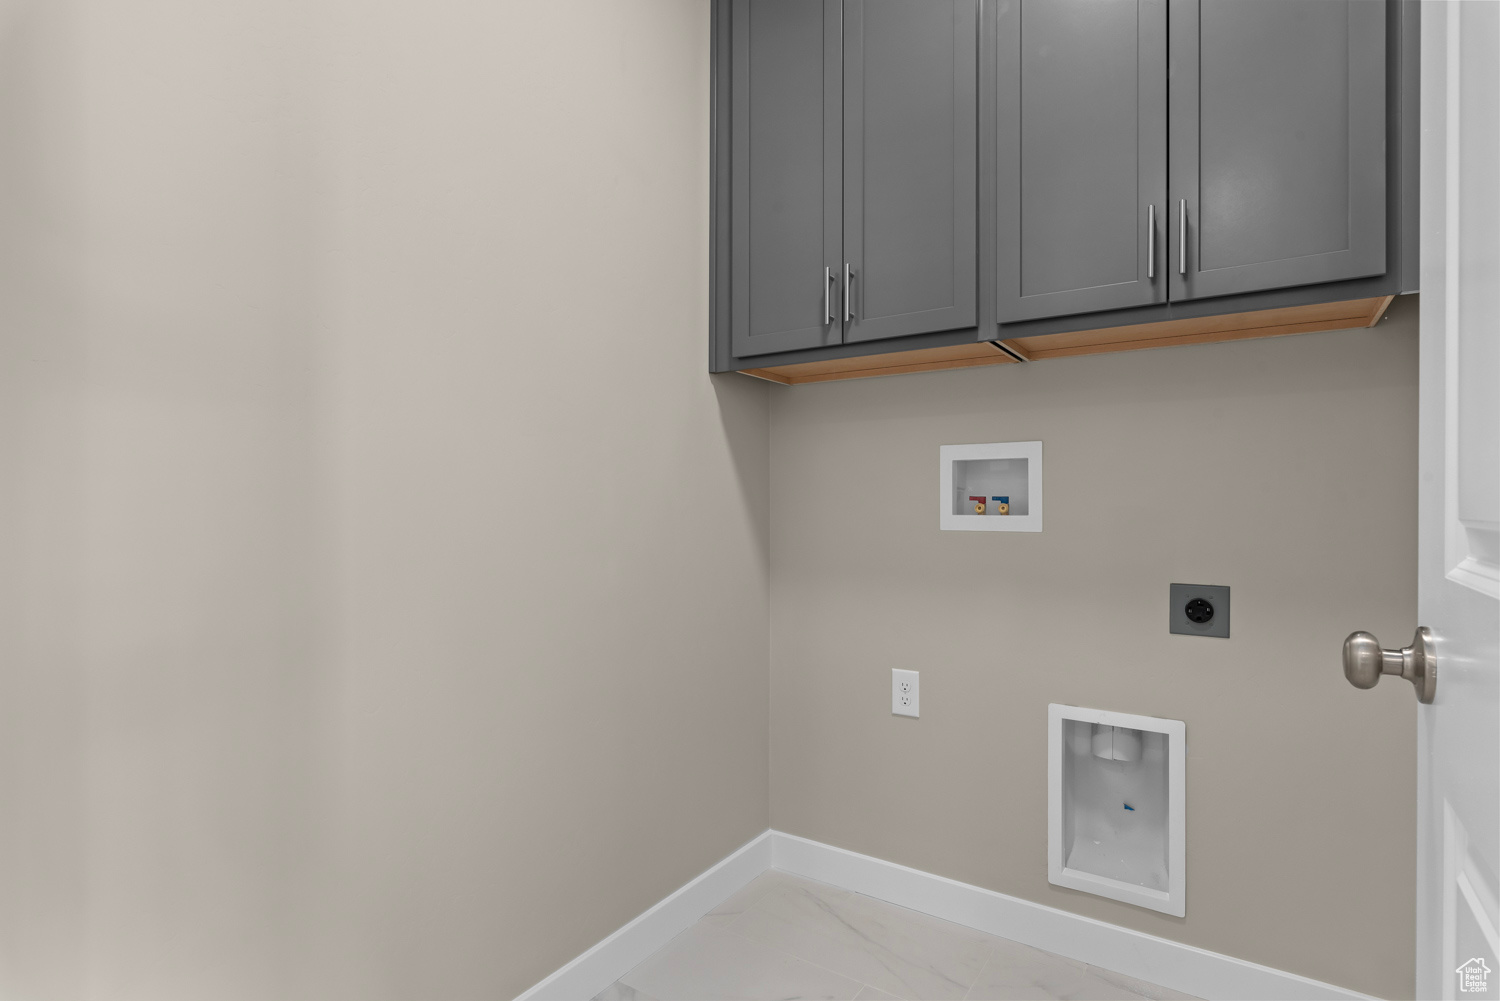 Clothes washing area with cabinets, hookup for an electric dryer, and hookup for a washing machine